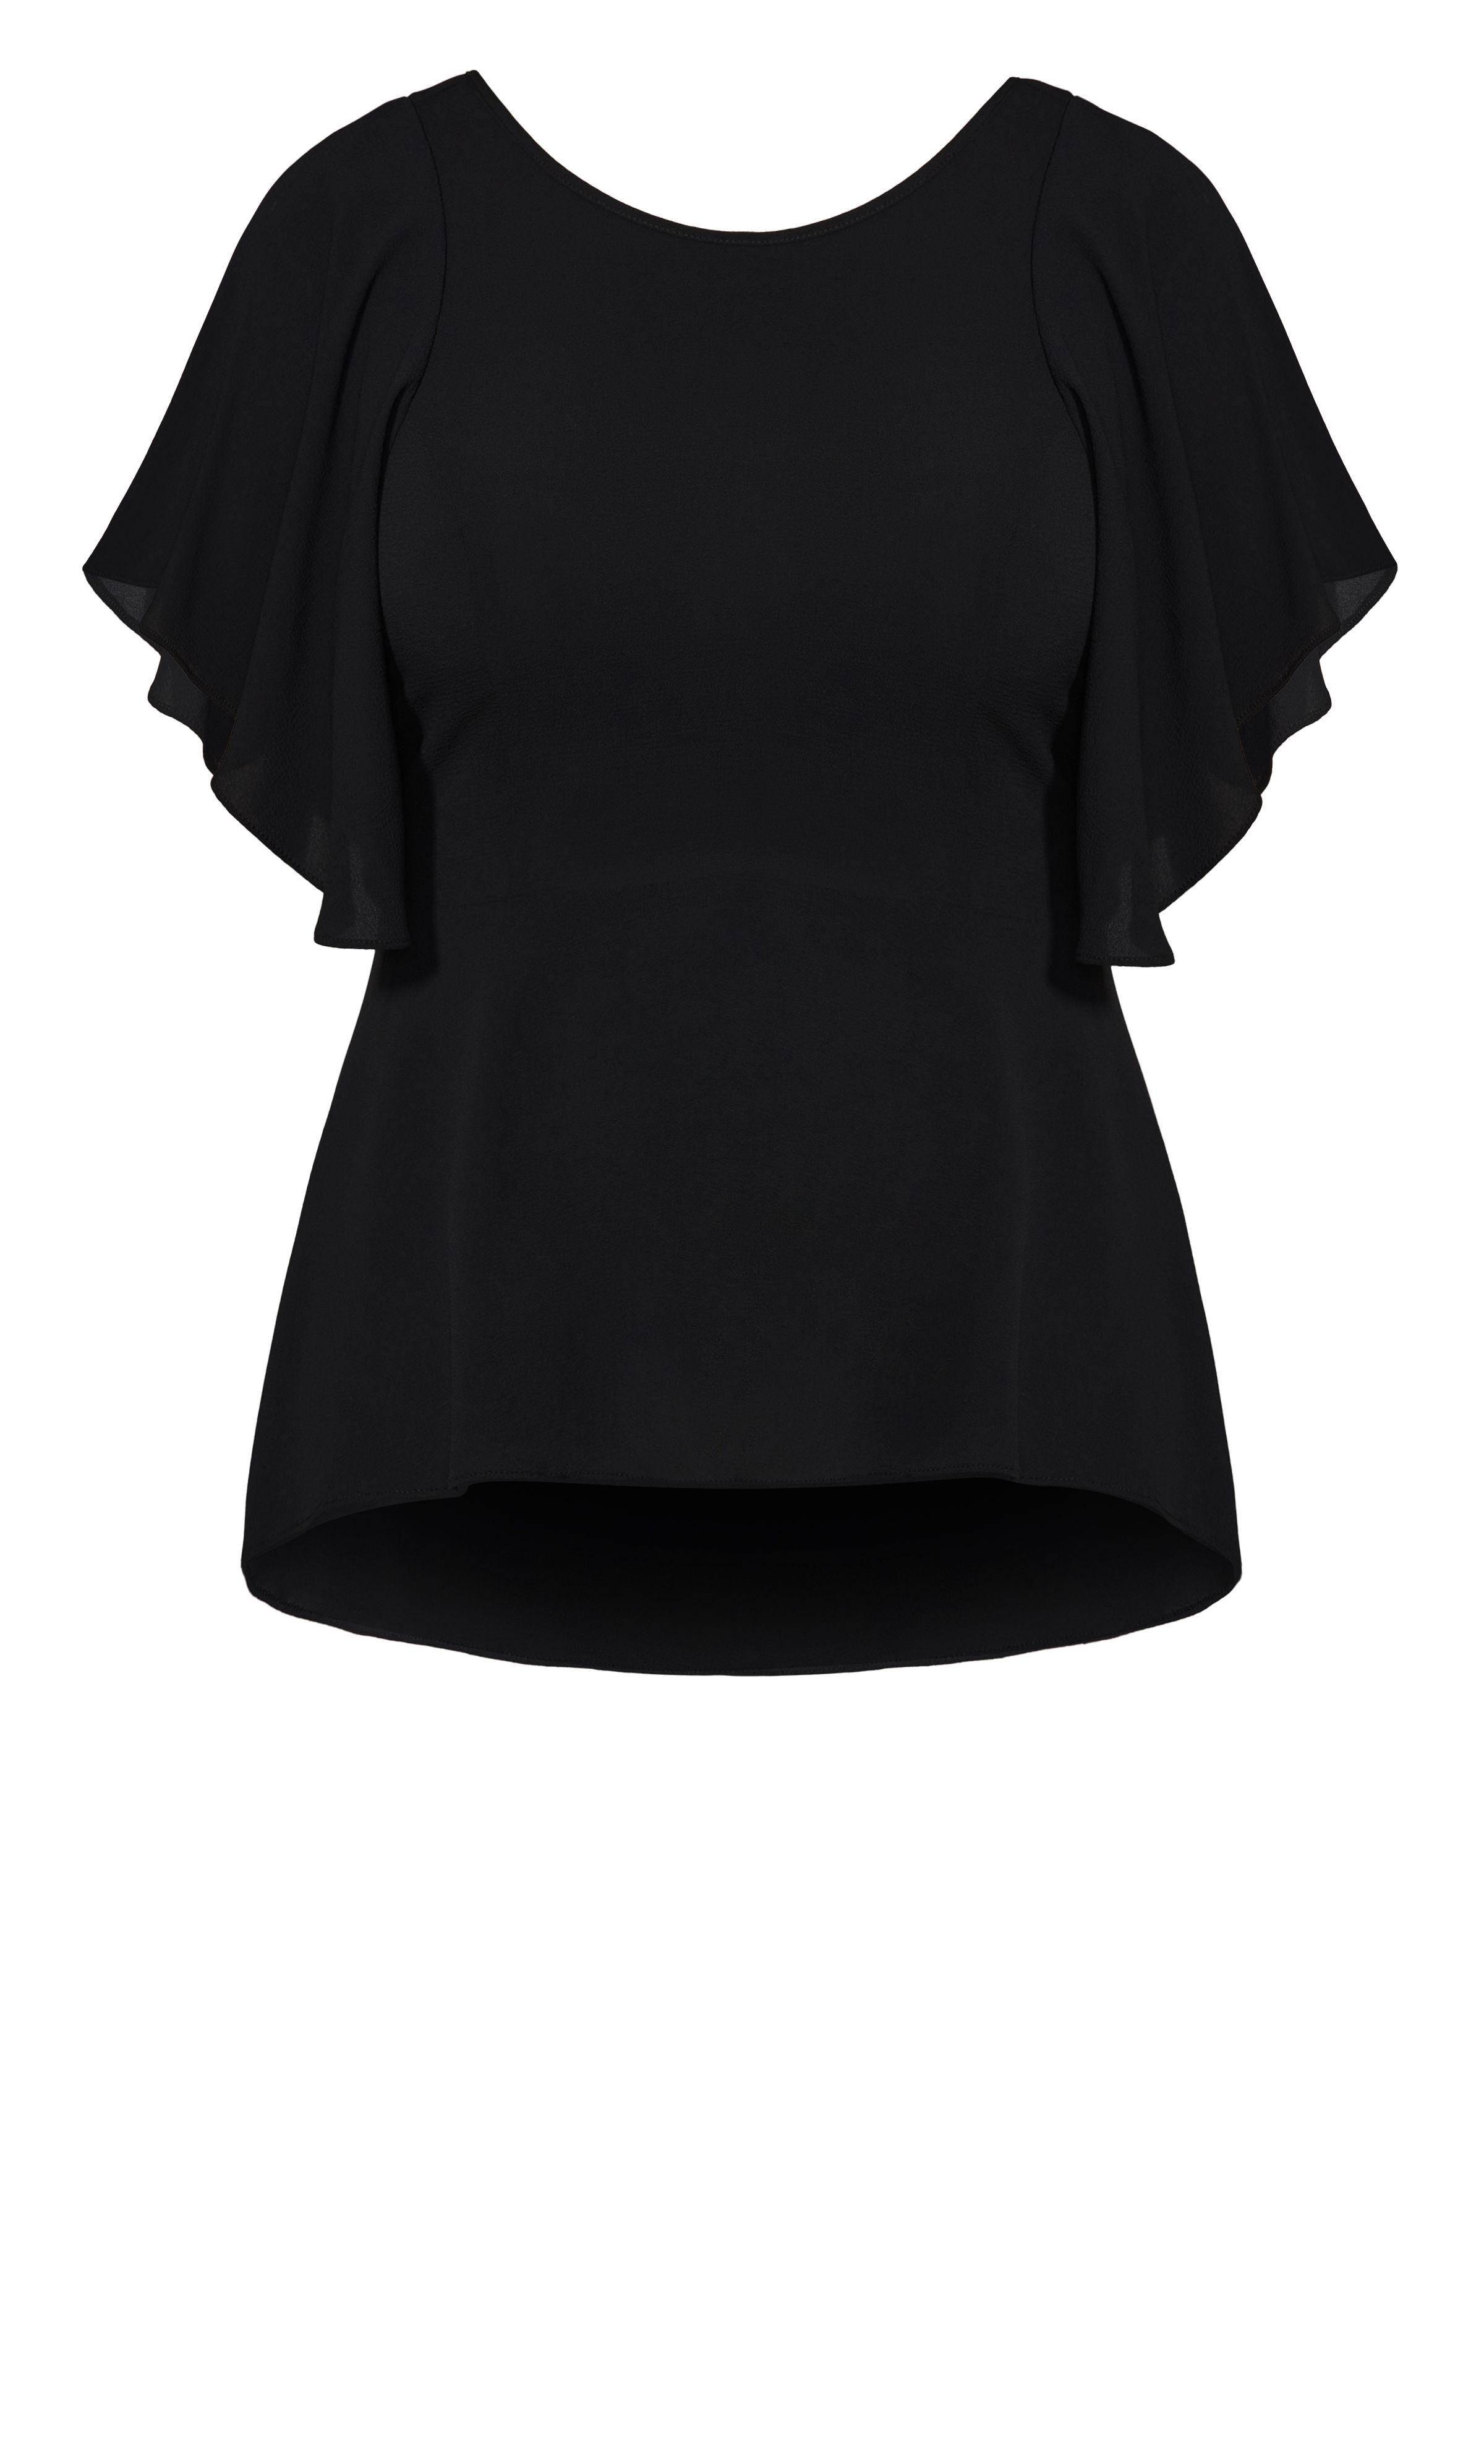 Set the mood in the feminine stylings of our Romantic Mood Top. Offering a flattering flared silhouette and floaty flutter sleeves, this top adds a touch of flirtation to any outfit! Key Features Include: - Round neckline - Floaty open short sleeve - Fitted waist - Peplum shape - Hi-lo hemline - Low V back - Lightweight woven fabrication - Unlined For elevated work wear, style this top with tailored trousers and pumps. Spice it up for the evening with leather look trousers and minimalist heels.